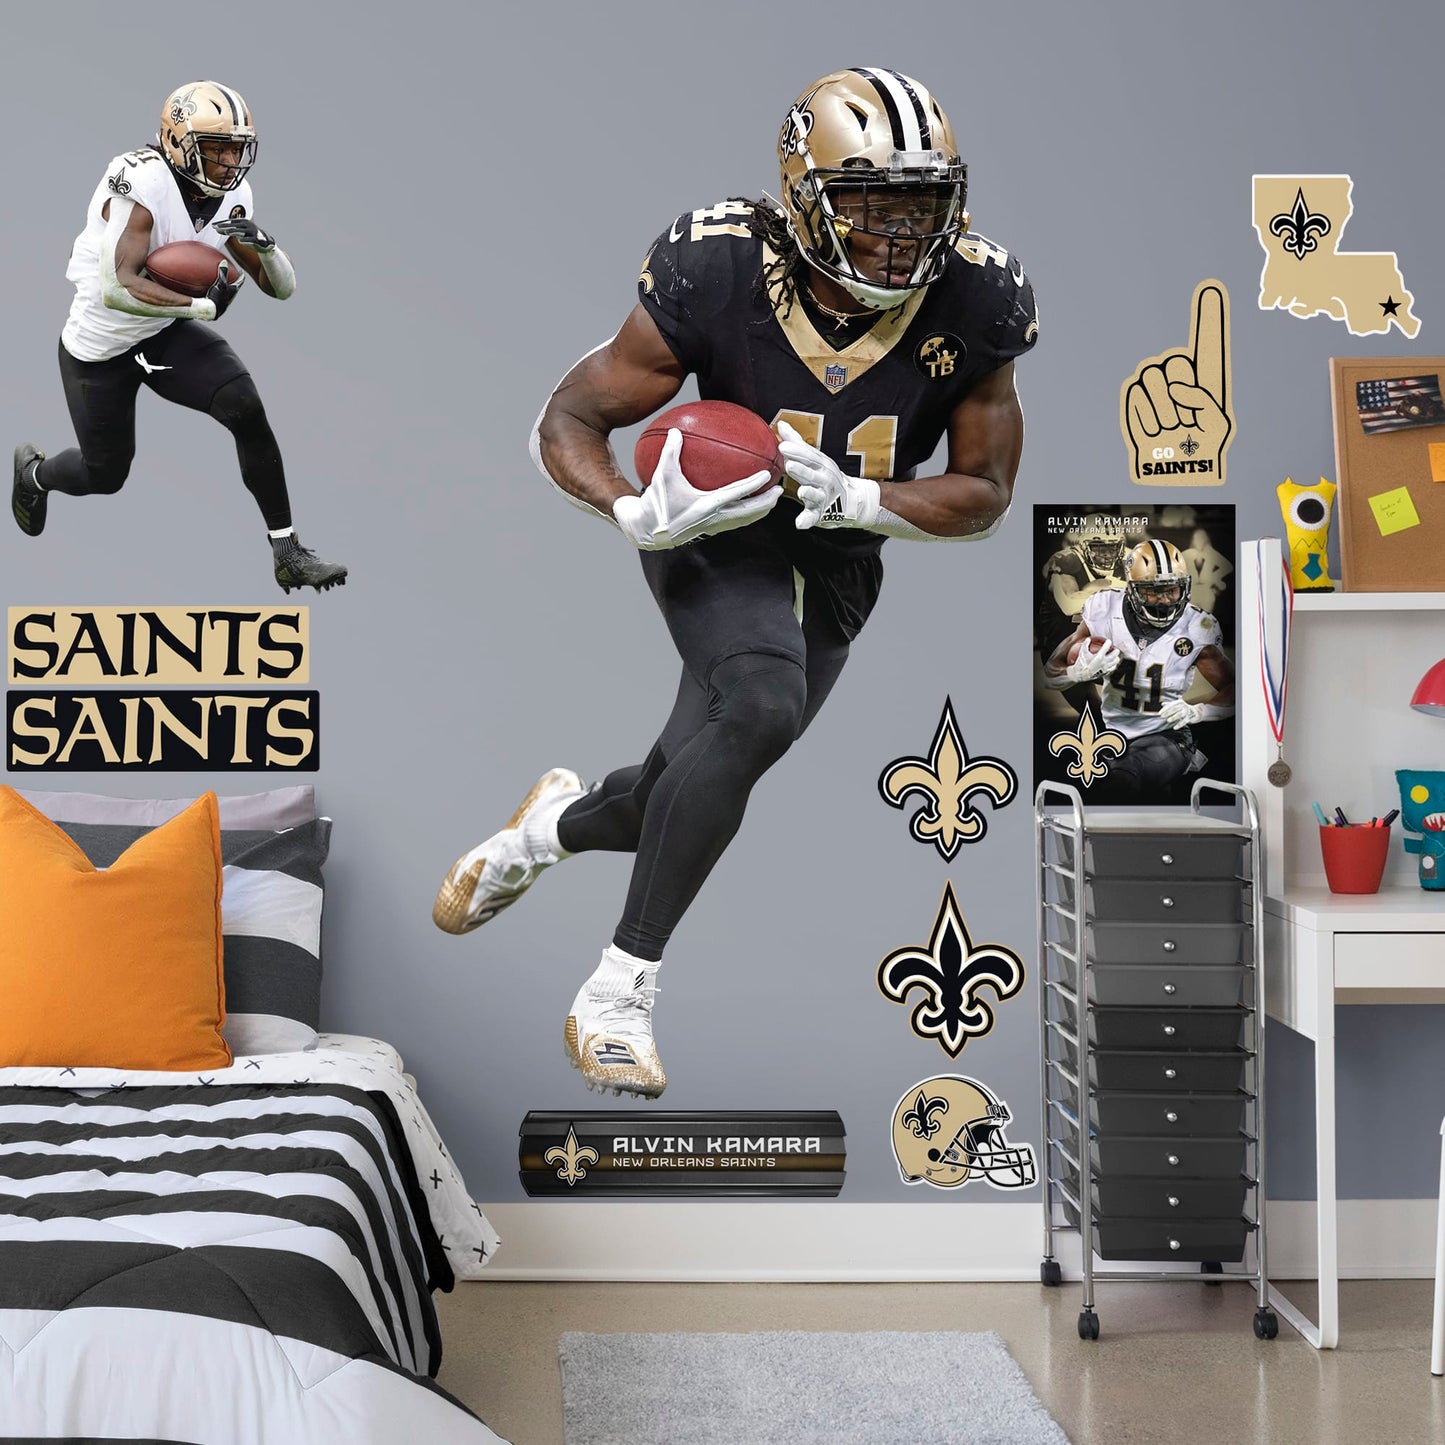 X-Large Athlete + 2 Decals (23"W x 39"H) Who Dat! Running back Alvin Kamara of the New Orleans Saints had a stellar start to his NFL career with an impressive 32 TDs in his first two seasons - an MVP in the making. Deck your walls in black and gold with a high-grade vinyl decal of the Saints' #41. It won't fade or tear, so remove it and reuse it wherever you watch the big game. Geaux Saints!